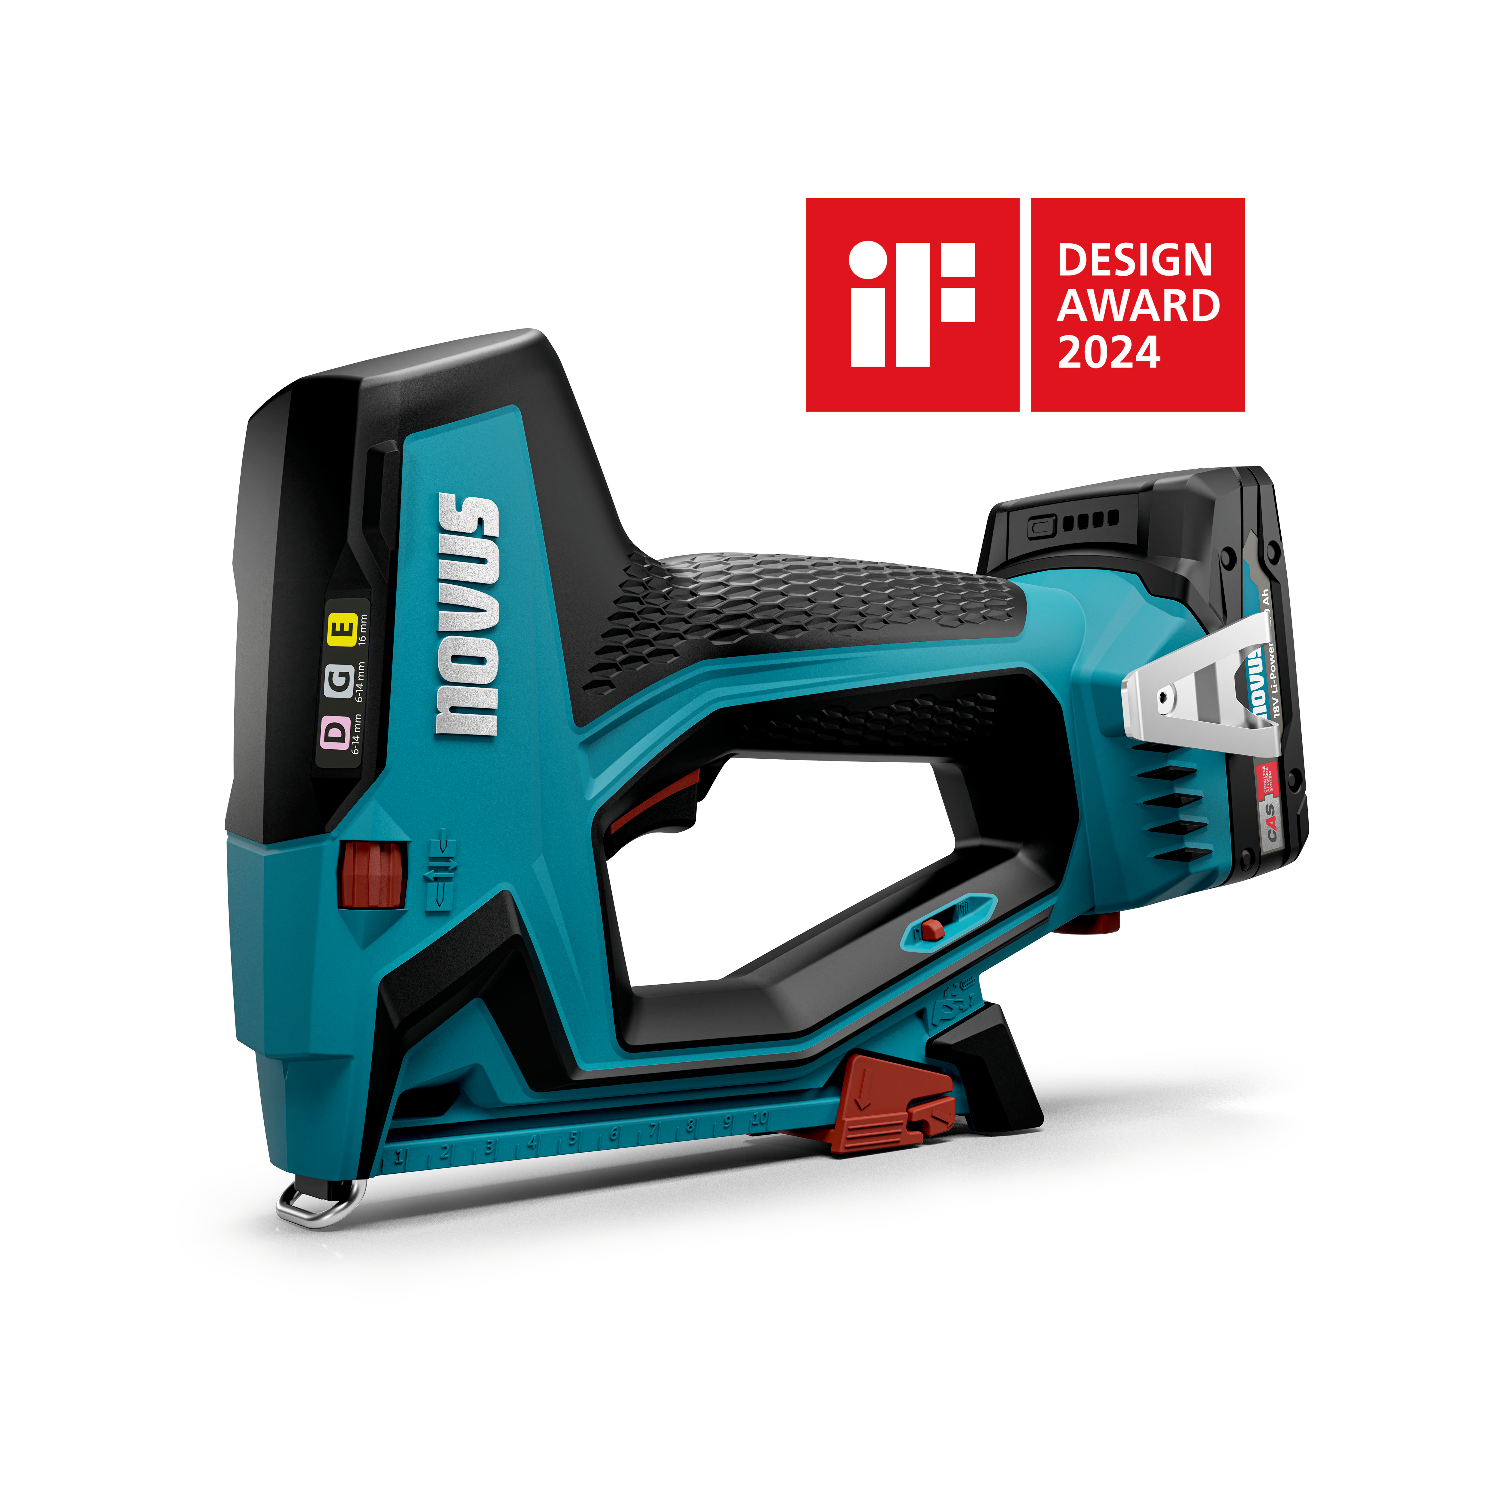 Our cordless tackers scored highly in the “Products” discipline and its “Tools” subcategory and won one of the world’s most coveted awards for design-oriented products, the IF Award.